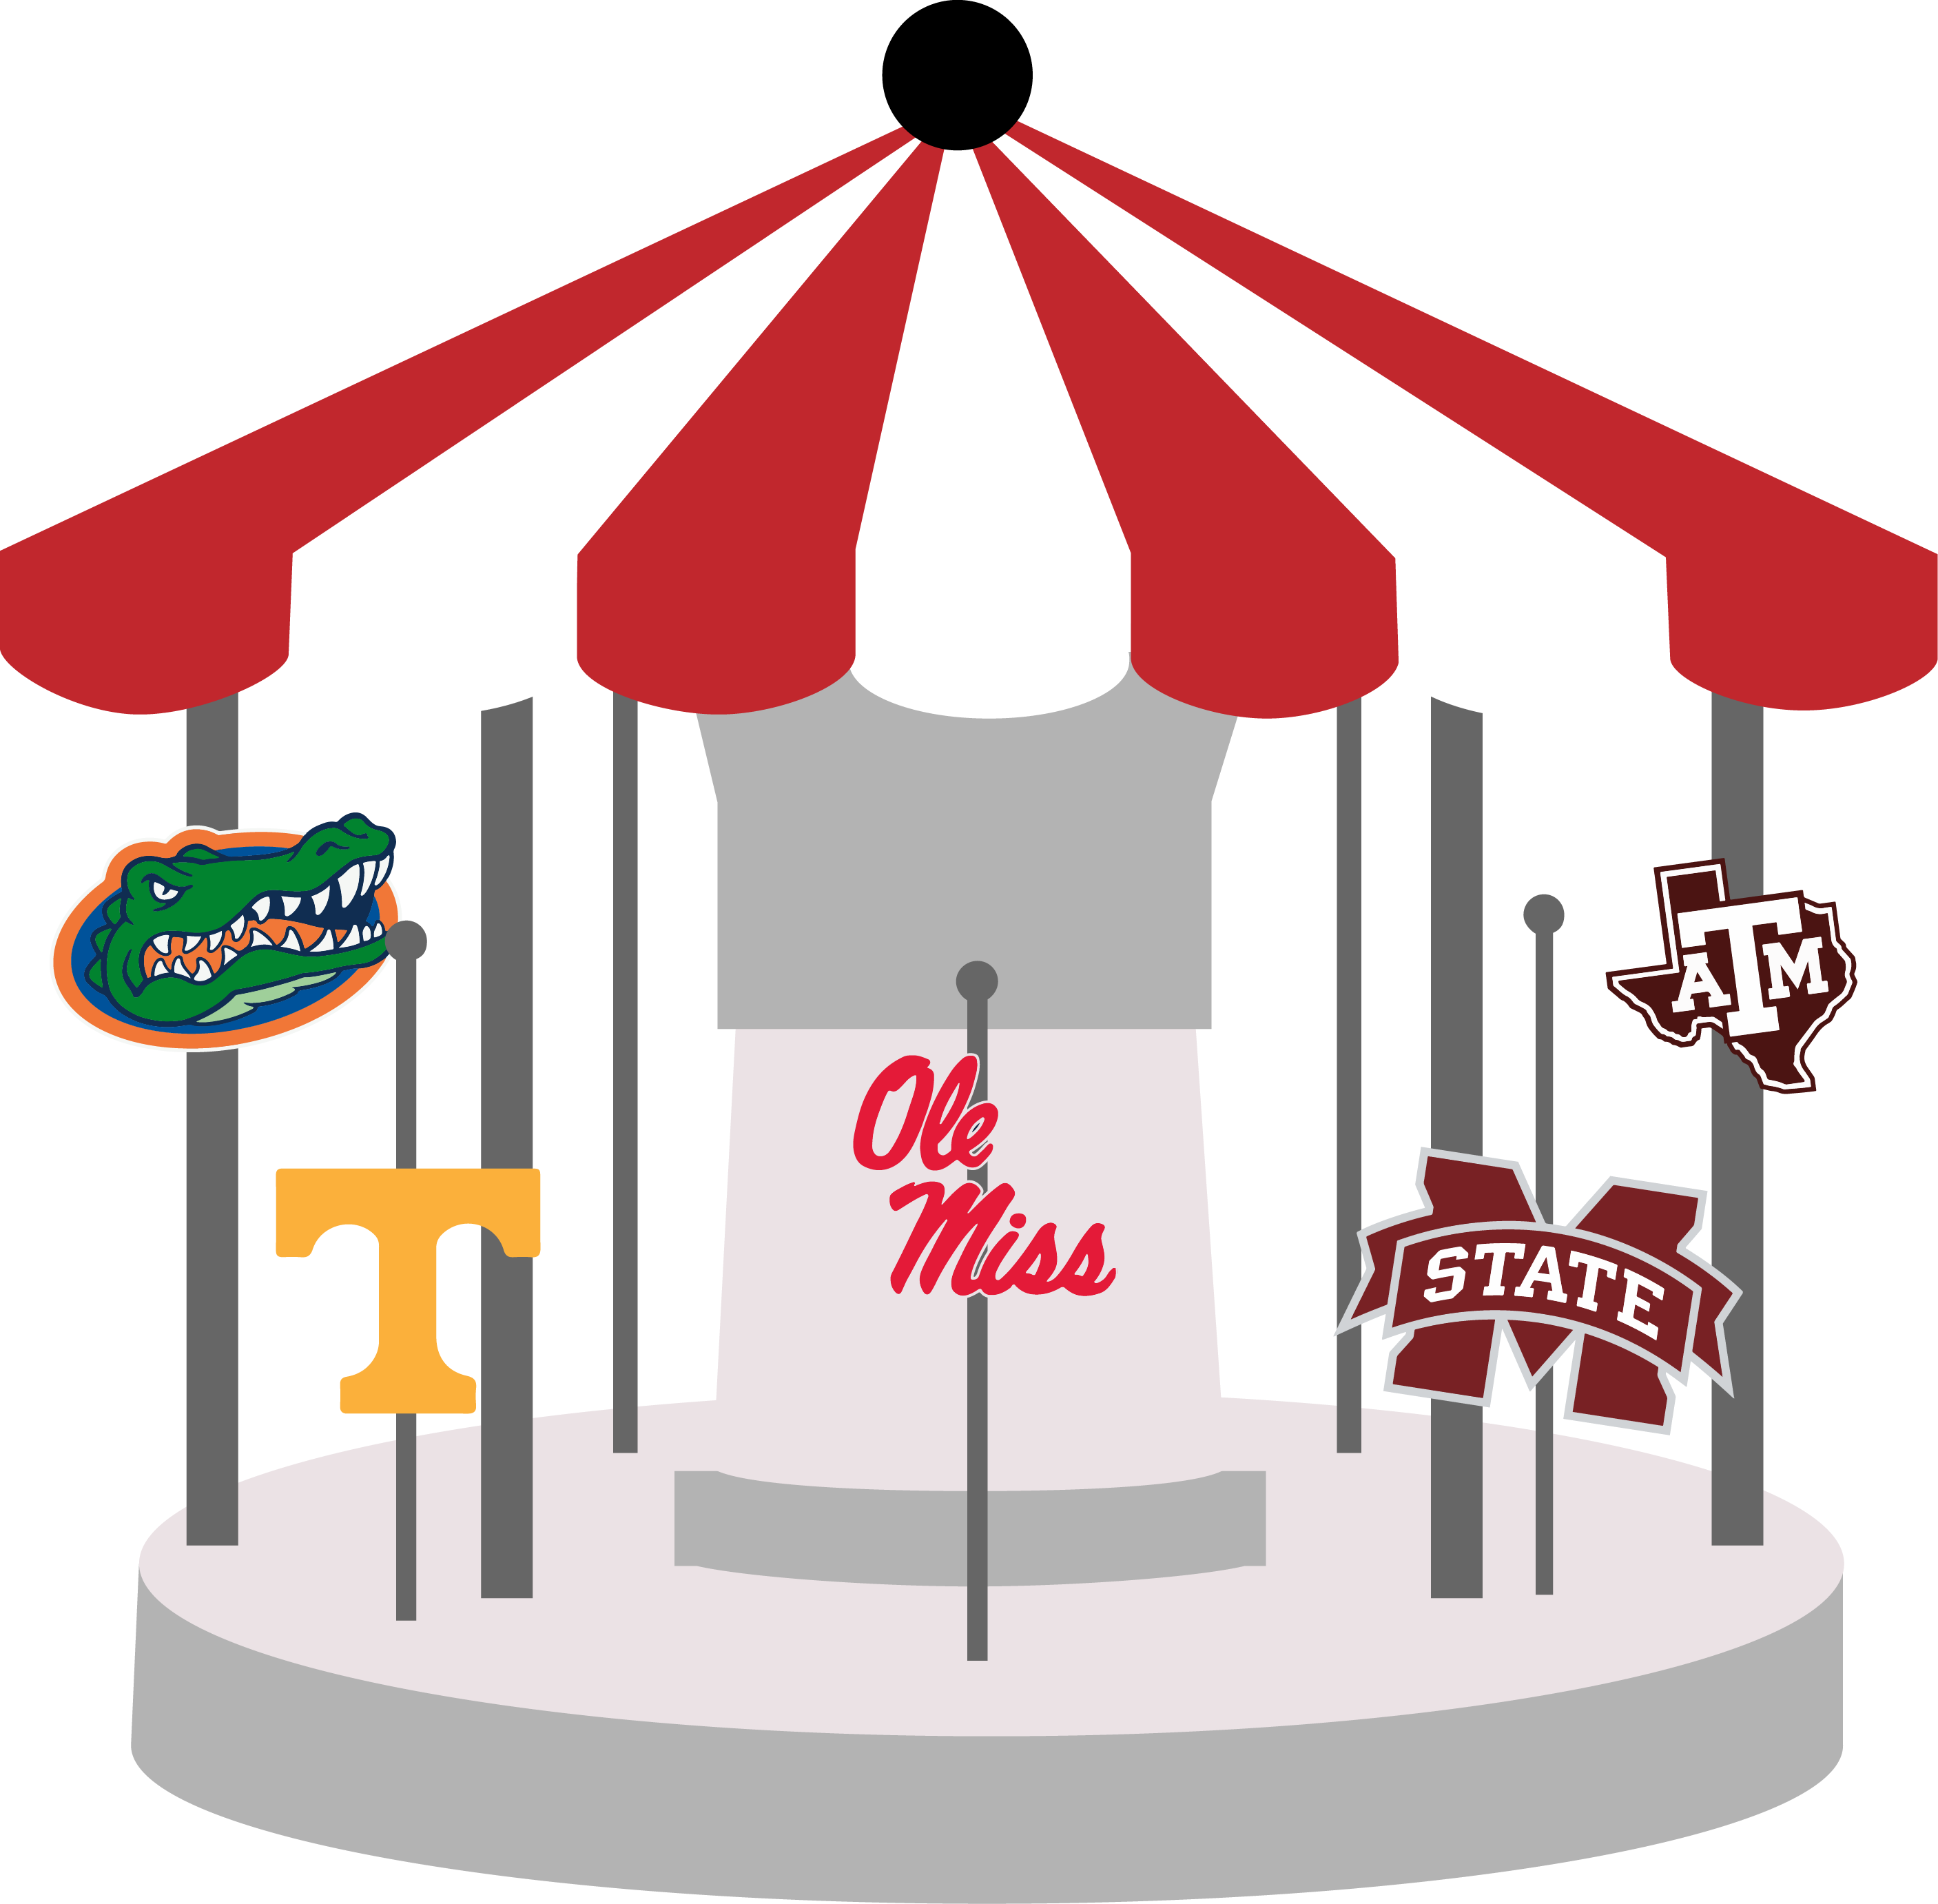 Column SEC coaching carousel sees major changes across the board The